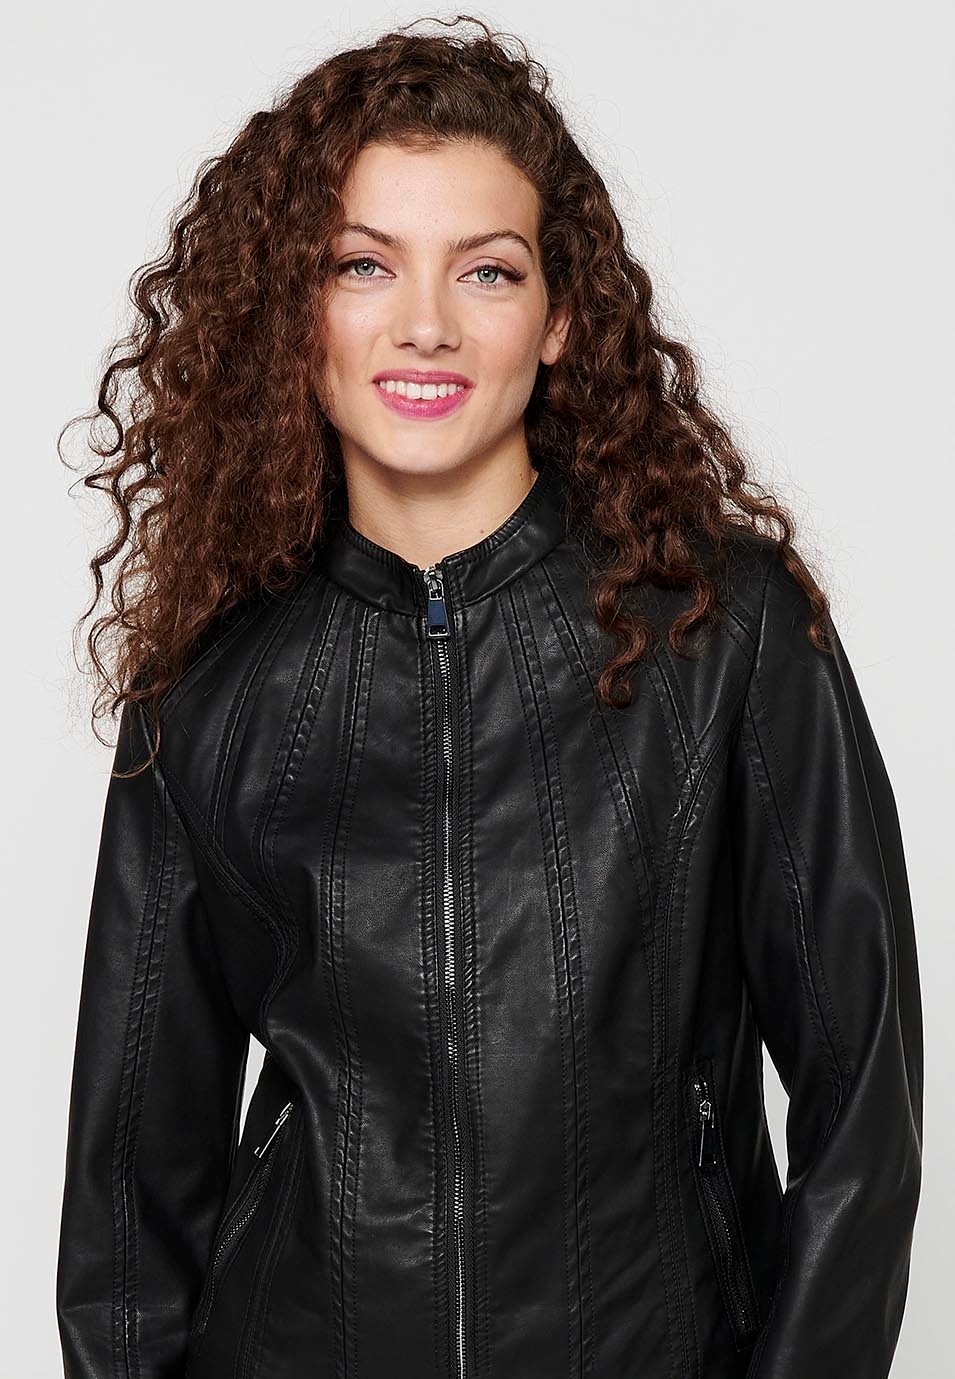 Long Sleeve Jacket with Round High Neck and Front Zipper Closure in Black for Women 4